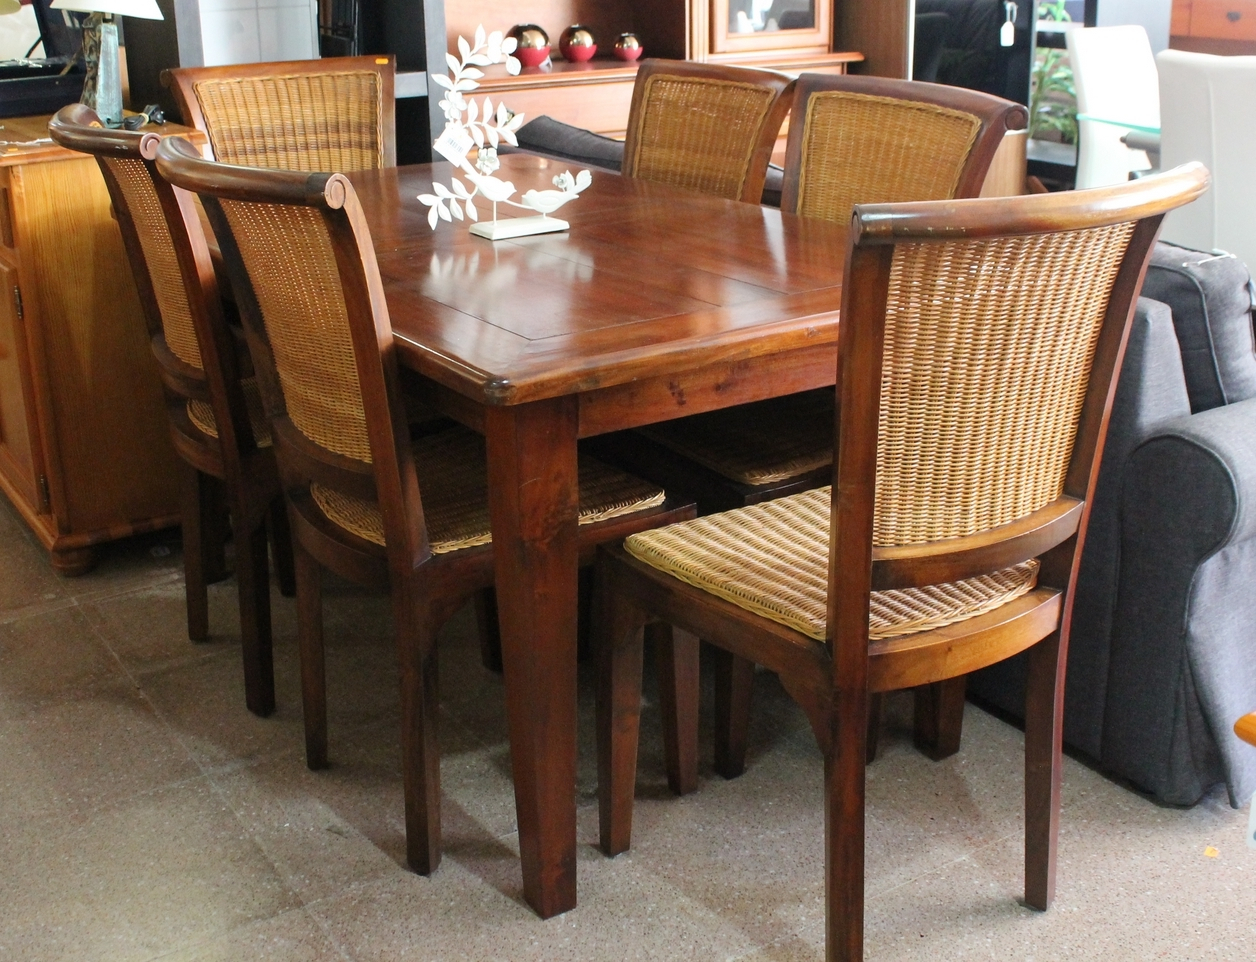 Second Hand Dining Room Table Sets